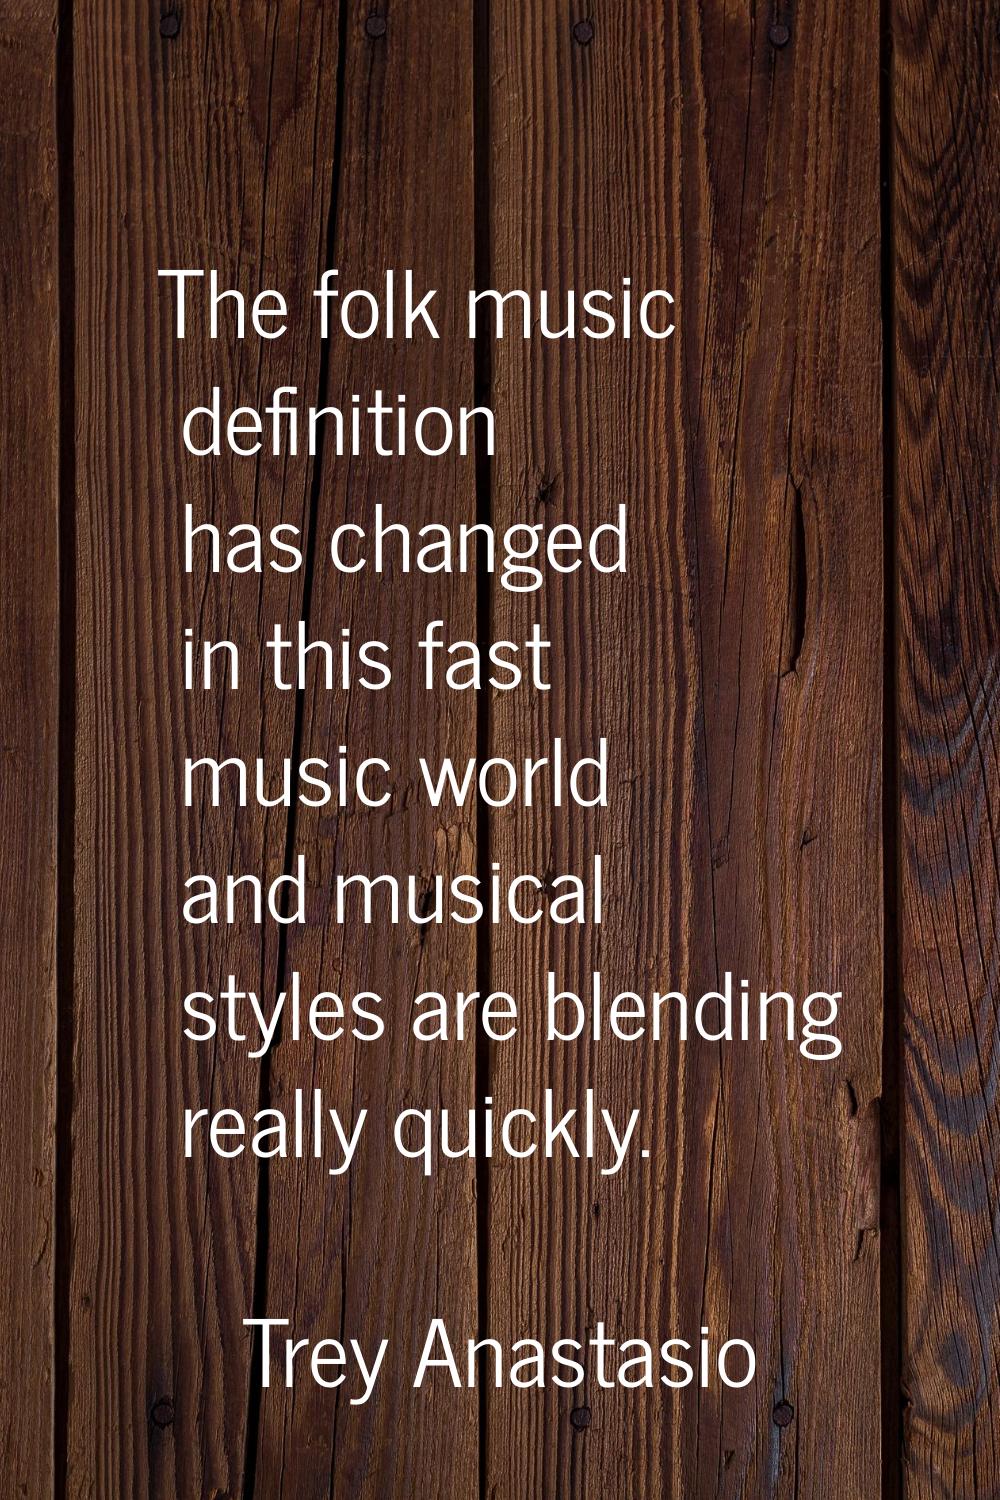 The folk music definition has changed in this fast music world and musical styles are blending real